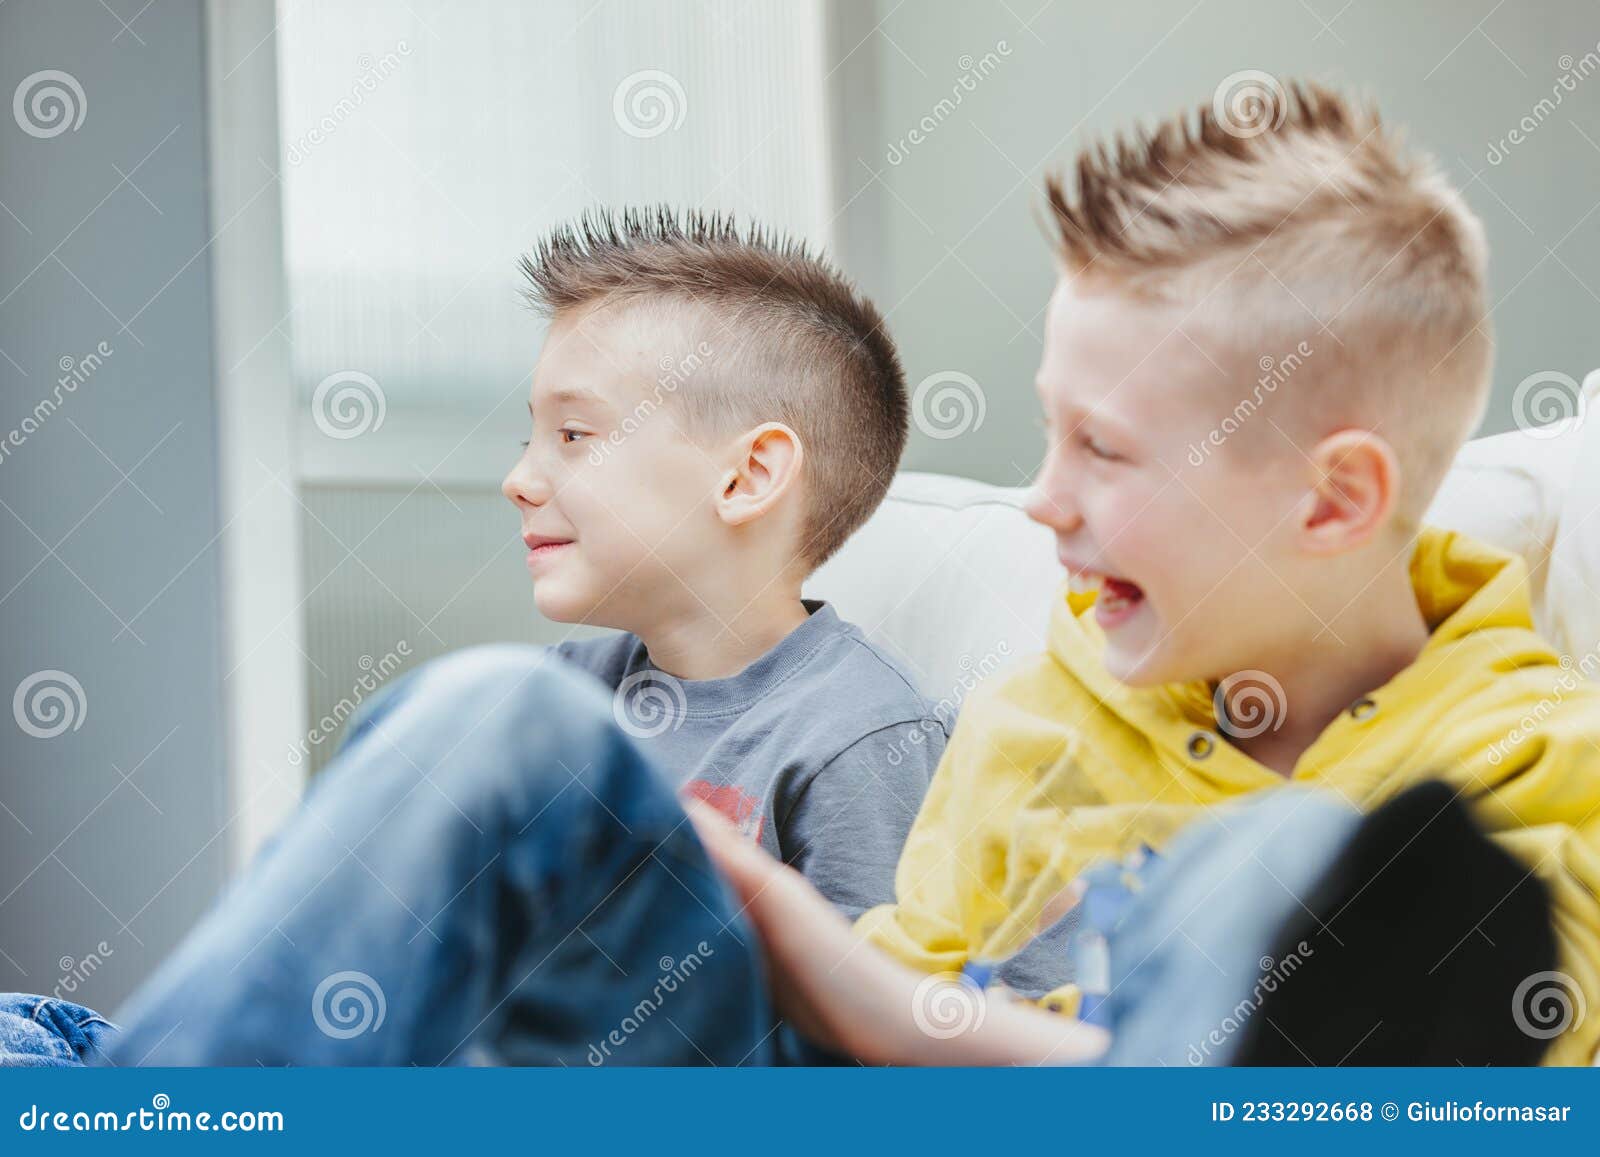 Young Boy Sitting on a Sofa with His Laughing Brother Stock Photo - Image  of hand, digital: 233292668